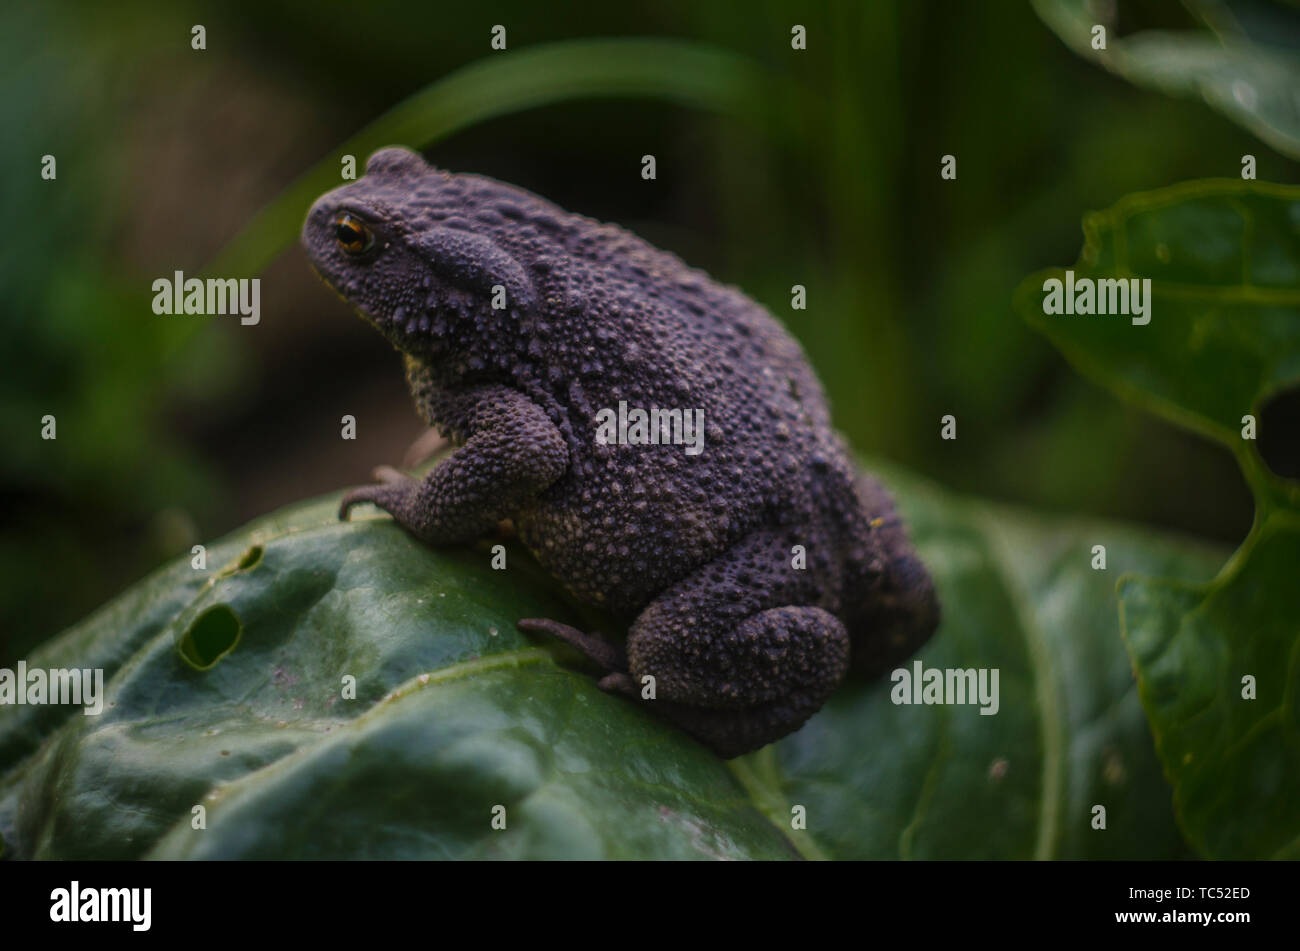 gray earth toad sitting on a cabbage leaf on a farm. Common toad, Bufo bufo, European toad, or simply the toad Stock Photo